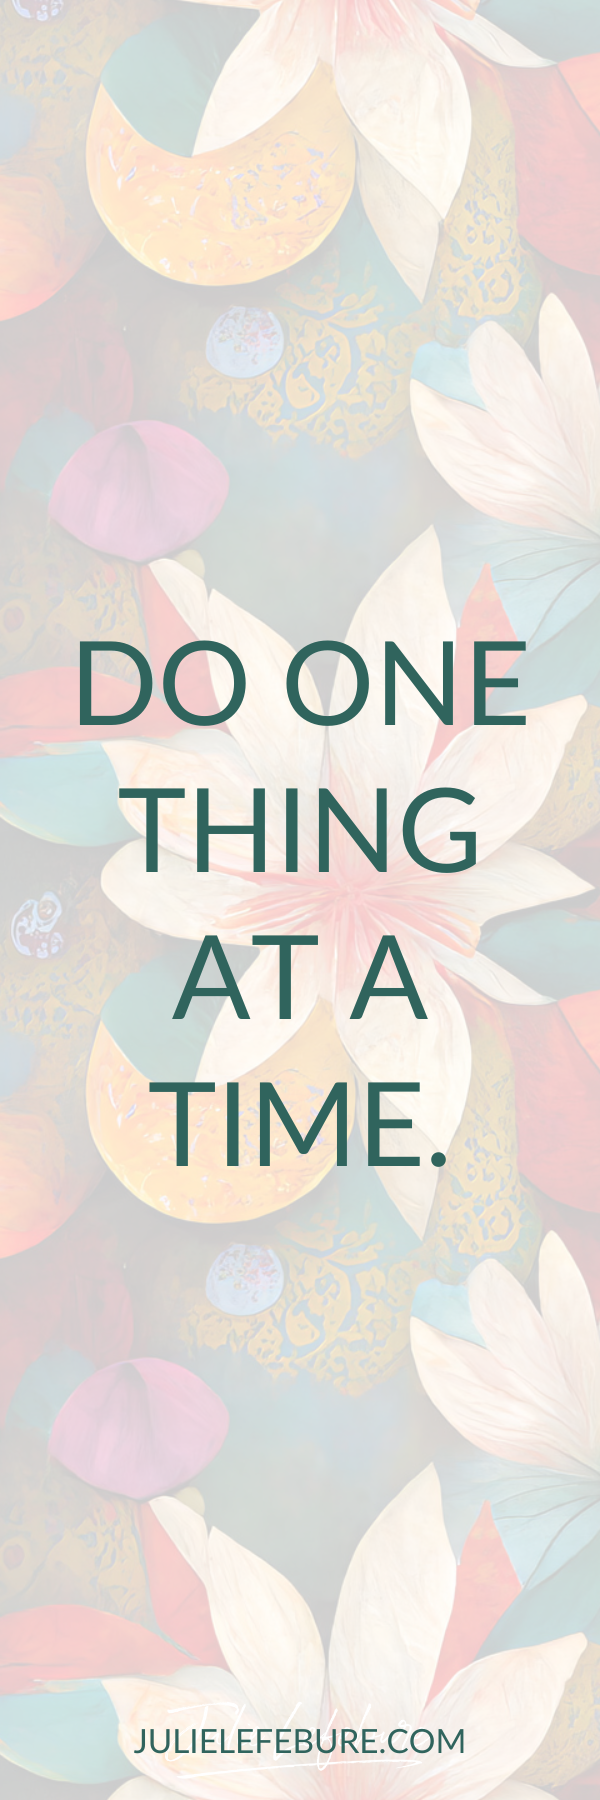 Do one thing at a time bookmark